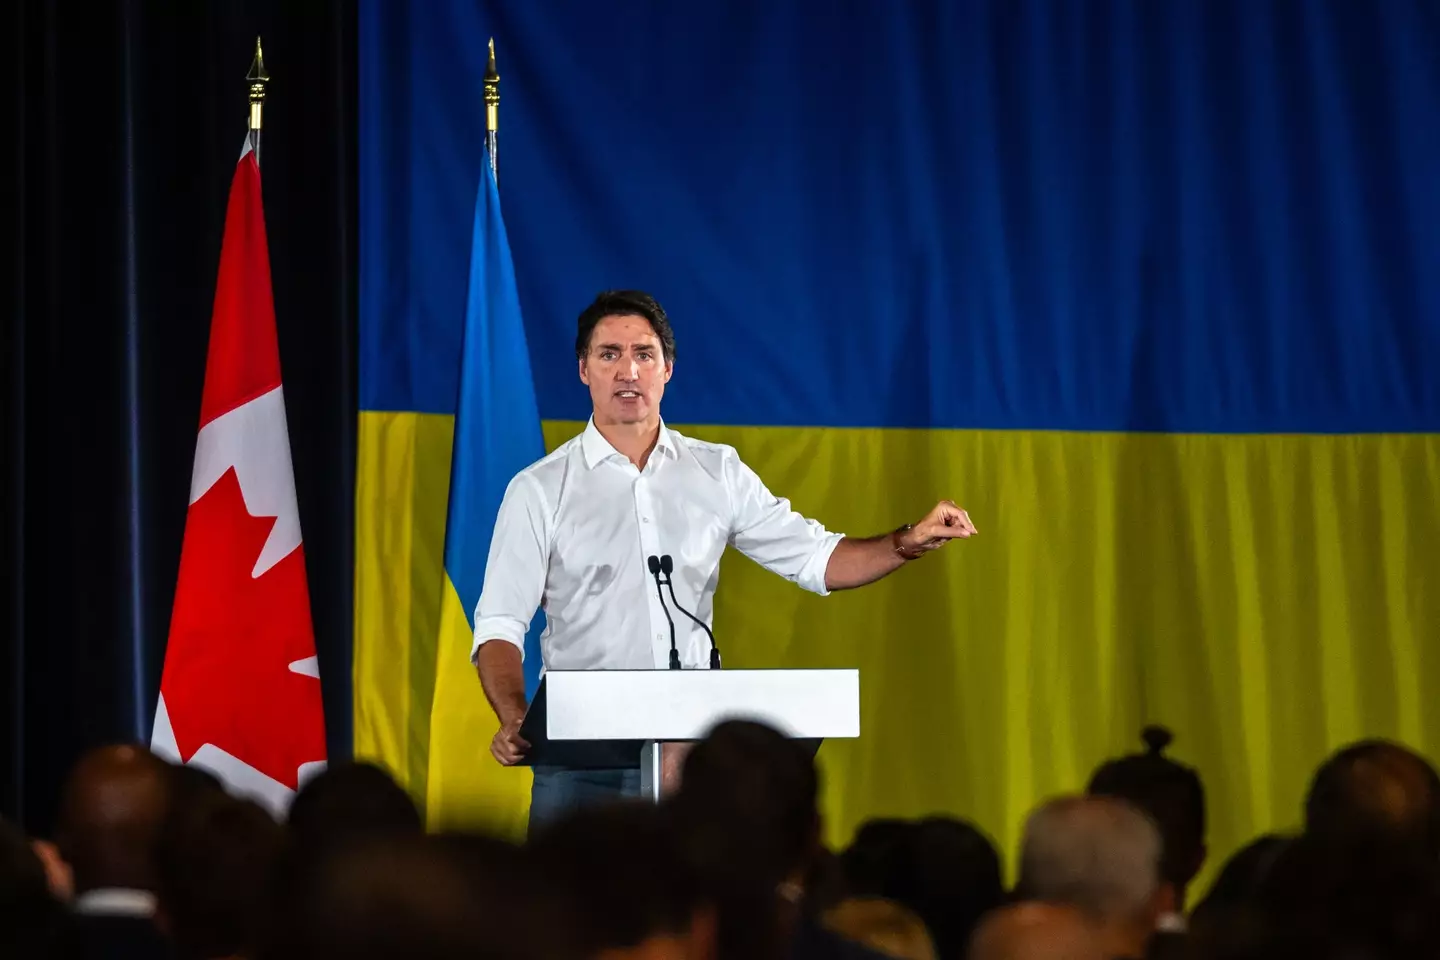 Canadian Prime Minister called the incident 'deeply embarrassing'.